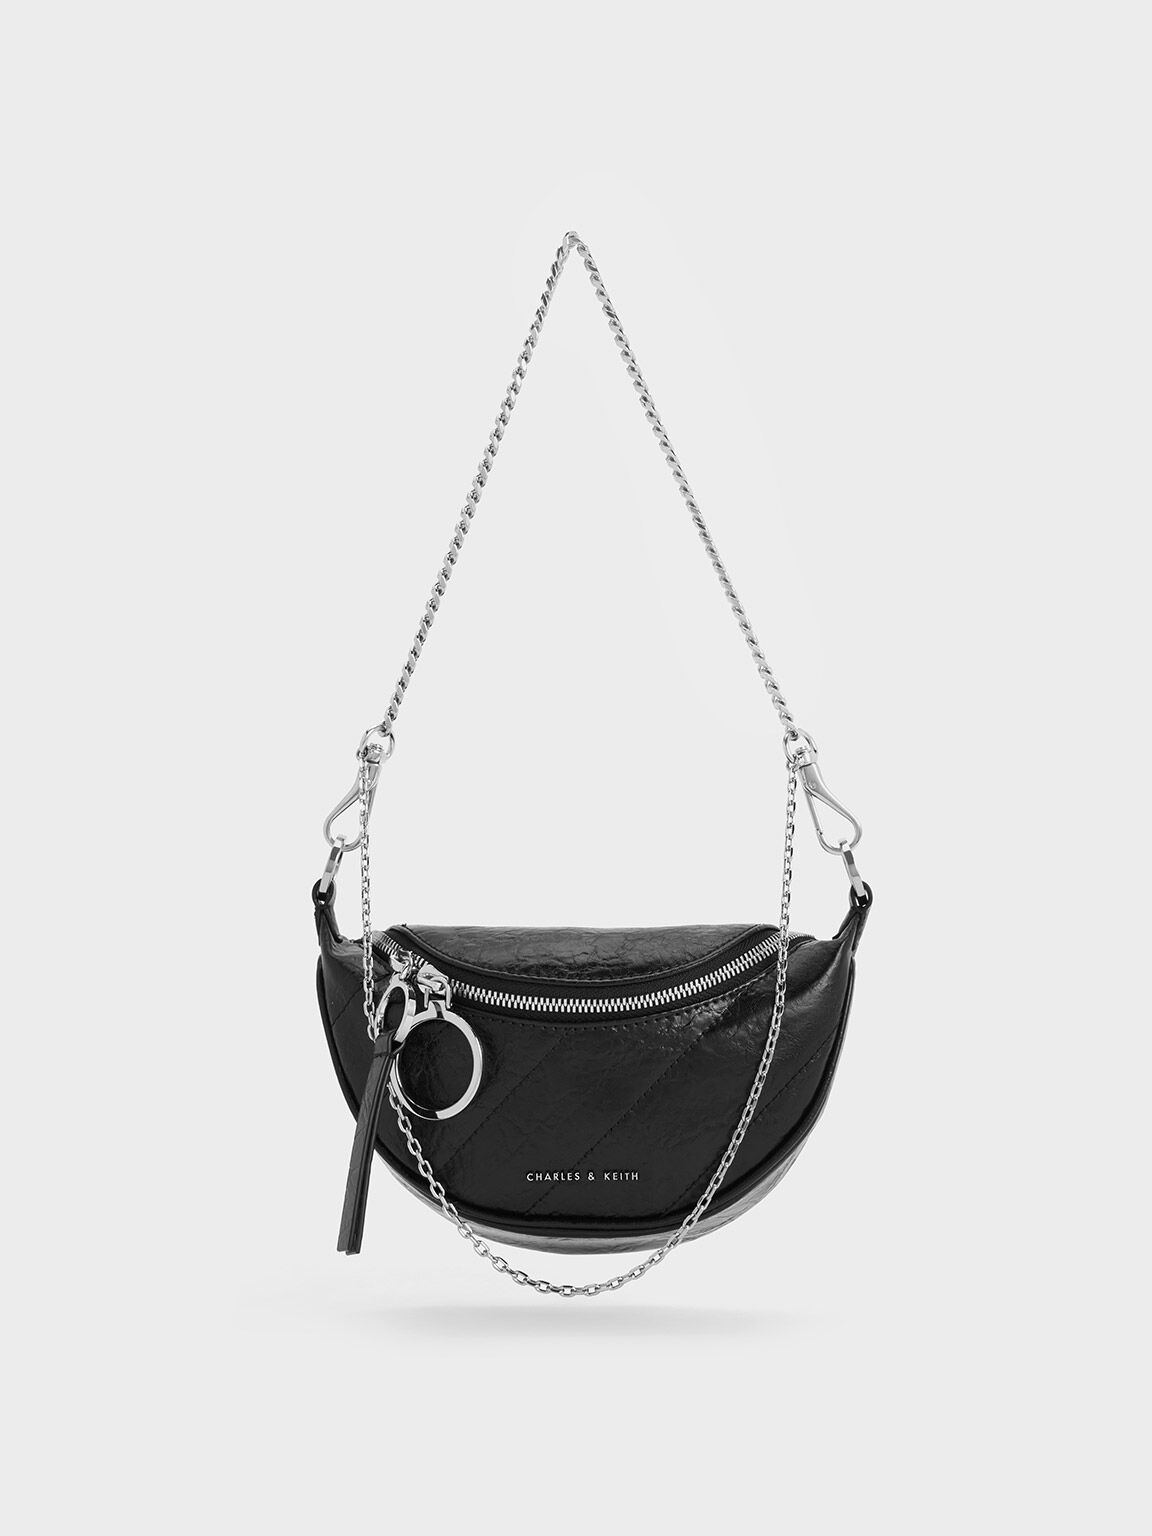 CHARLES & KEITH Heart-shaped crossbody bag in black as seen on